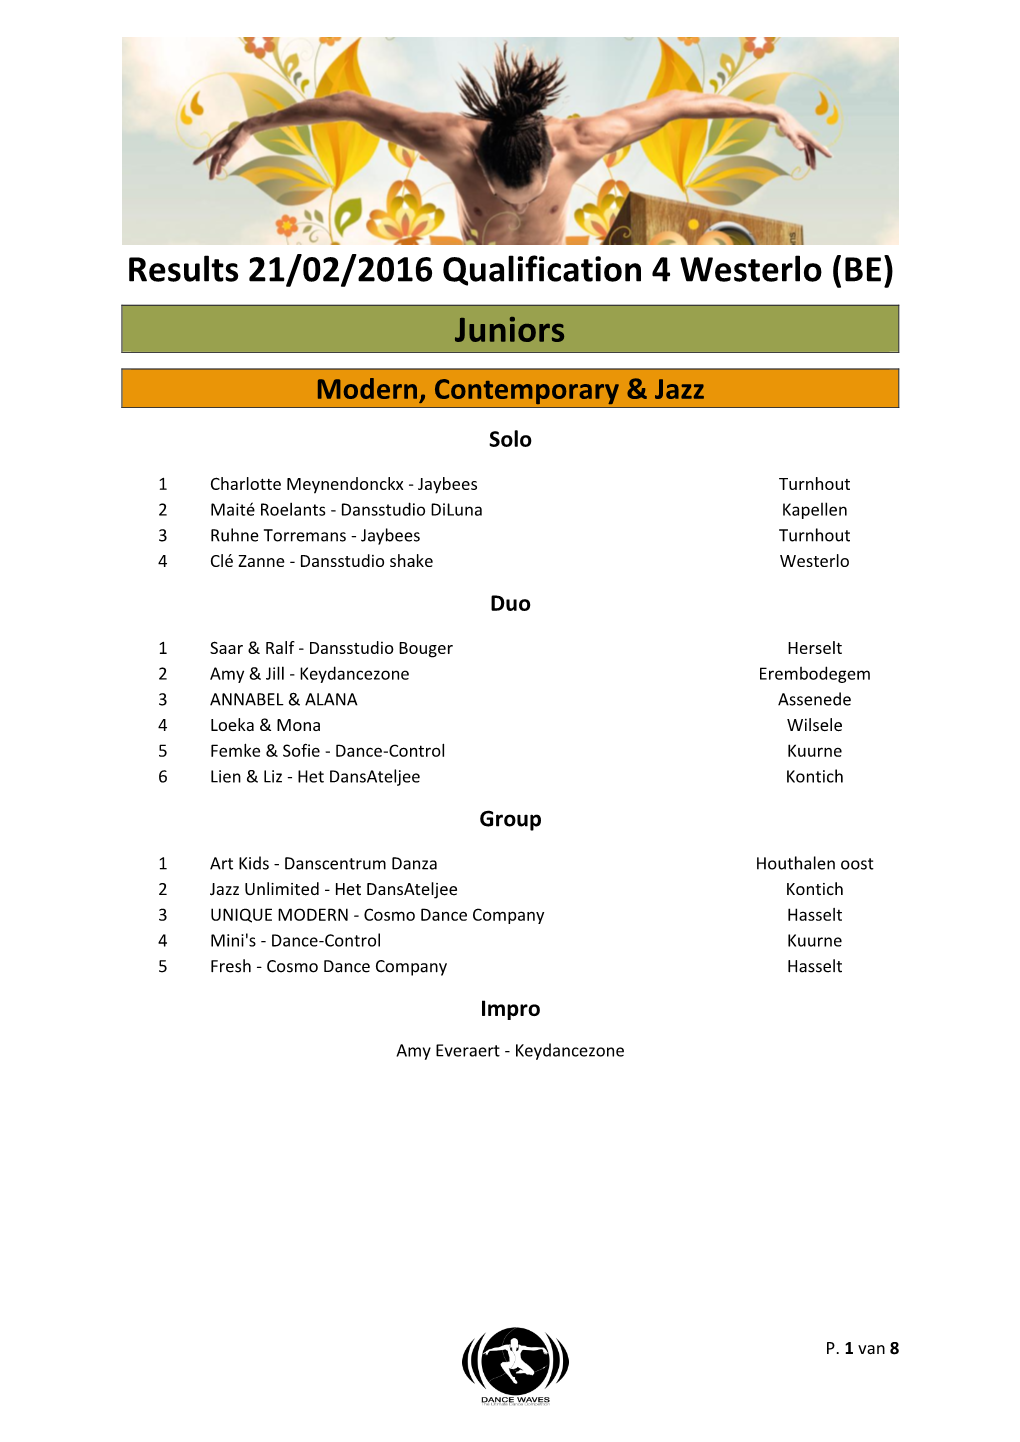 Results 21/02/2016 Qualification 4 Westerlo (BE) Juniors